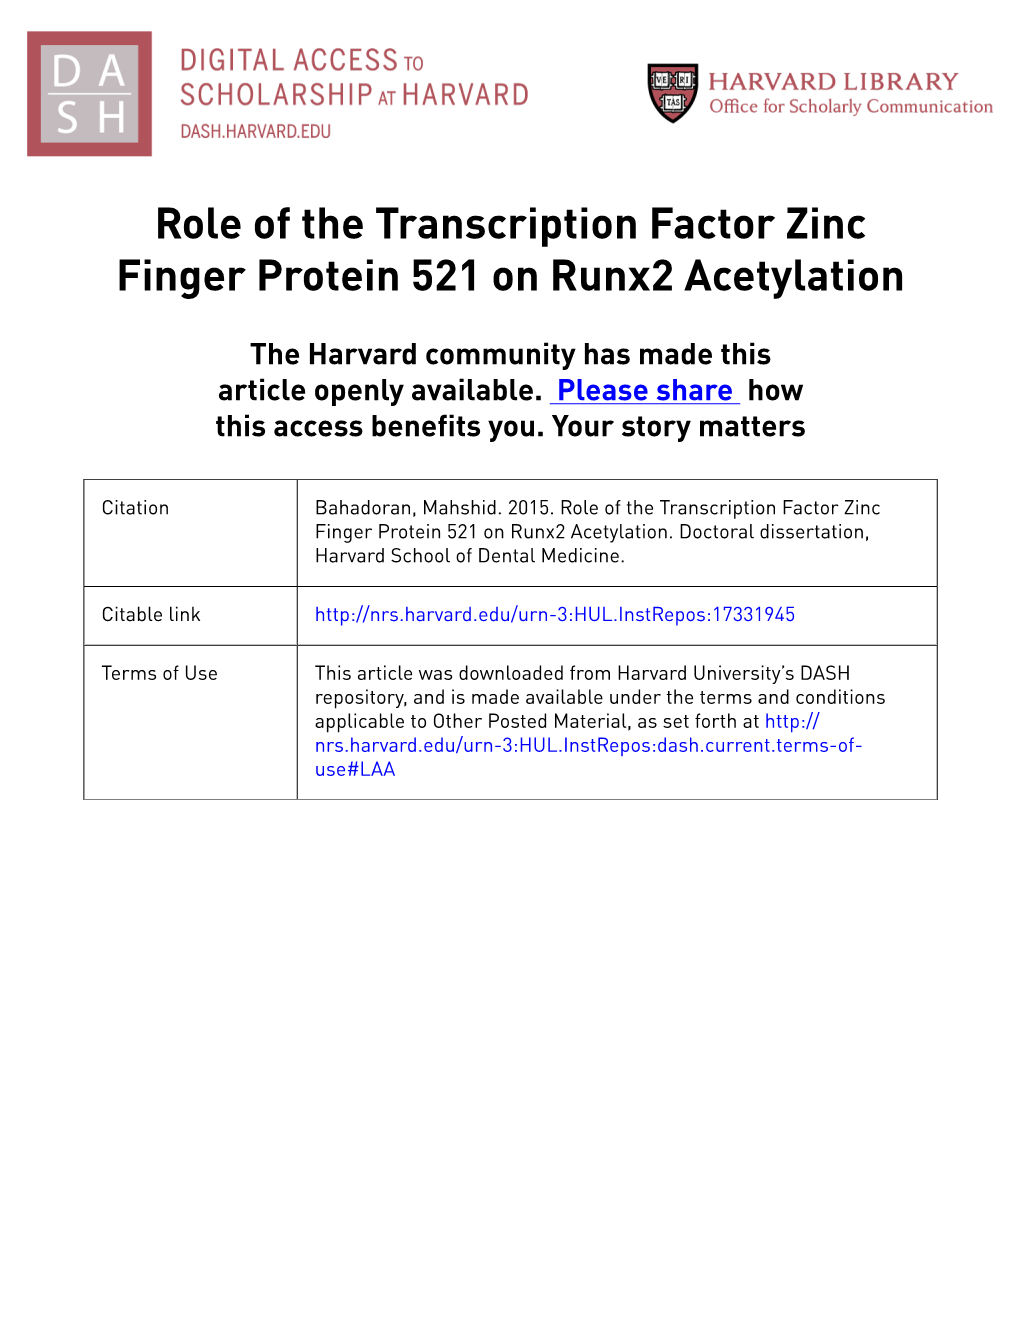 Role of the Transcription Factor Zinc Finger Protein 521 on Runx2 Acetylation